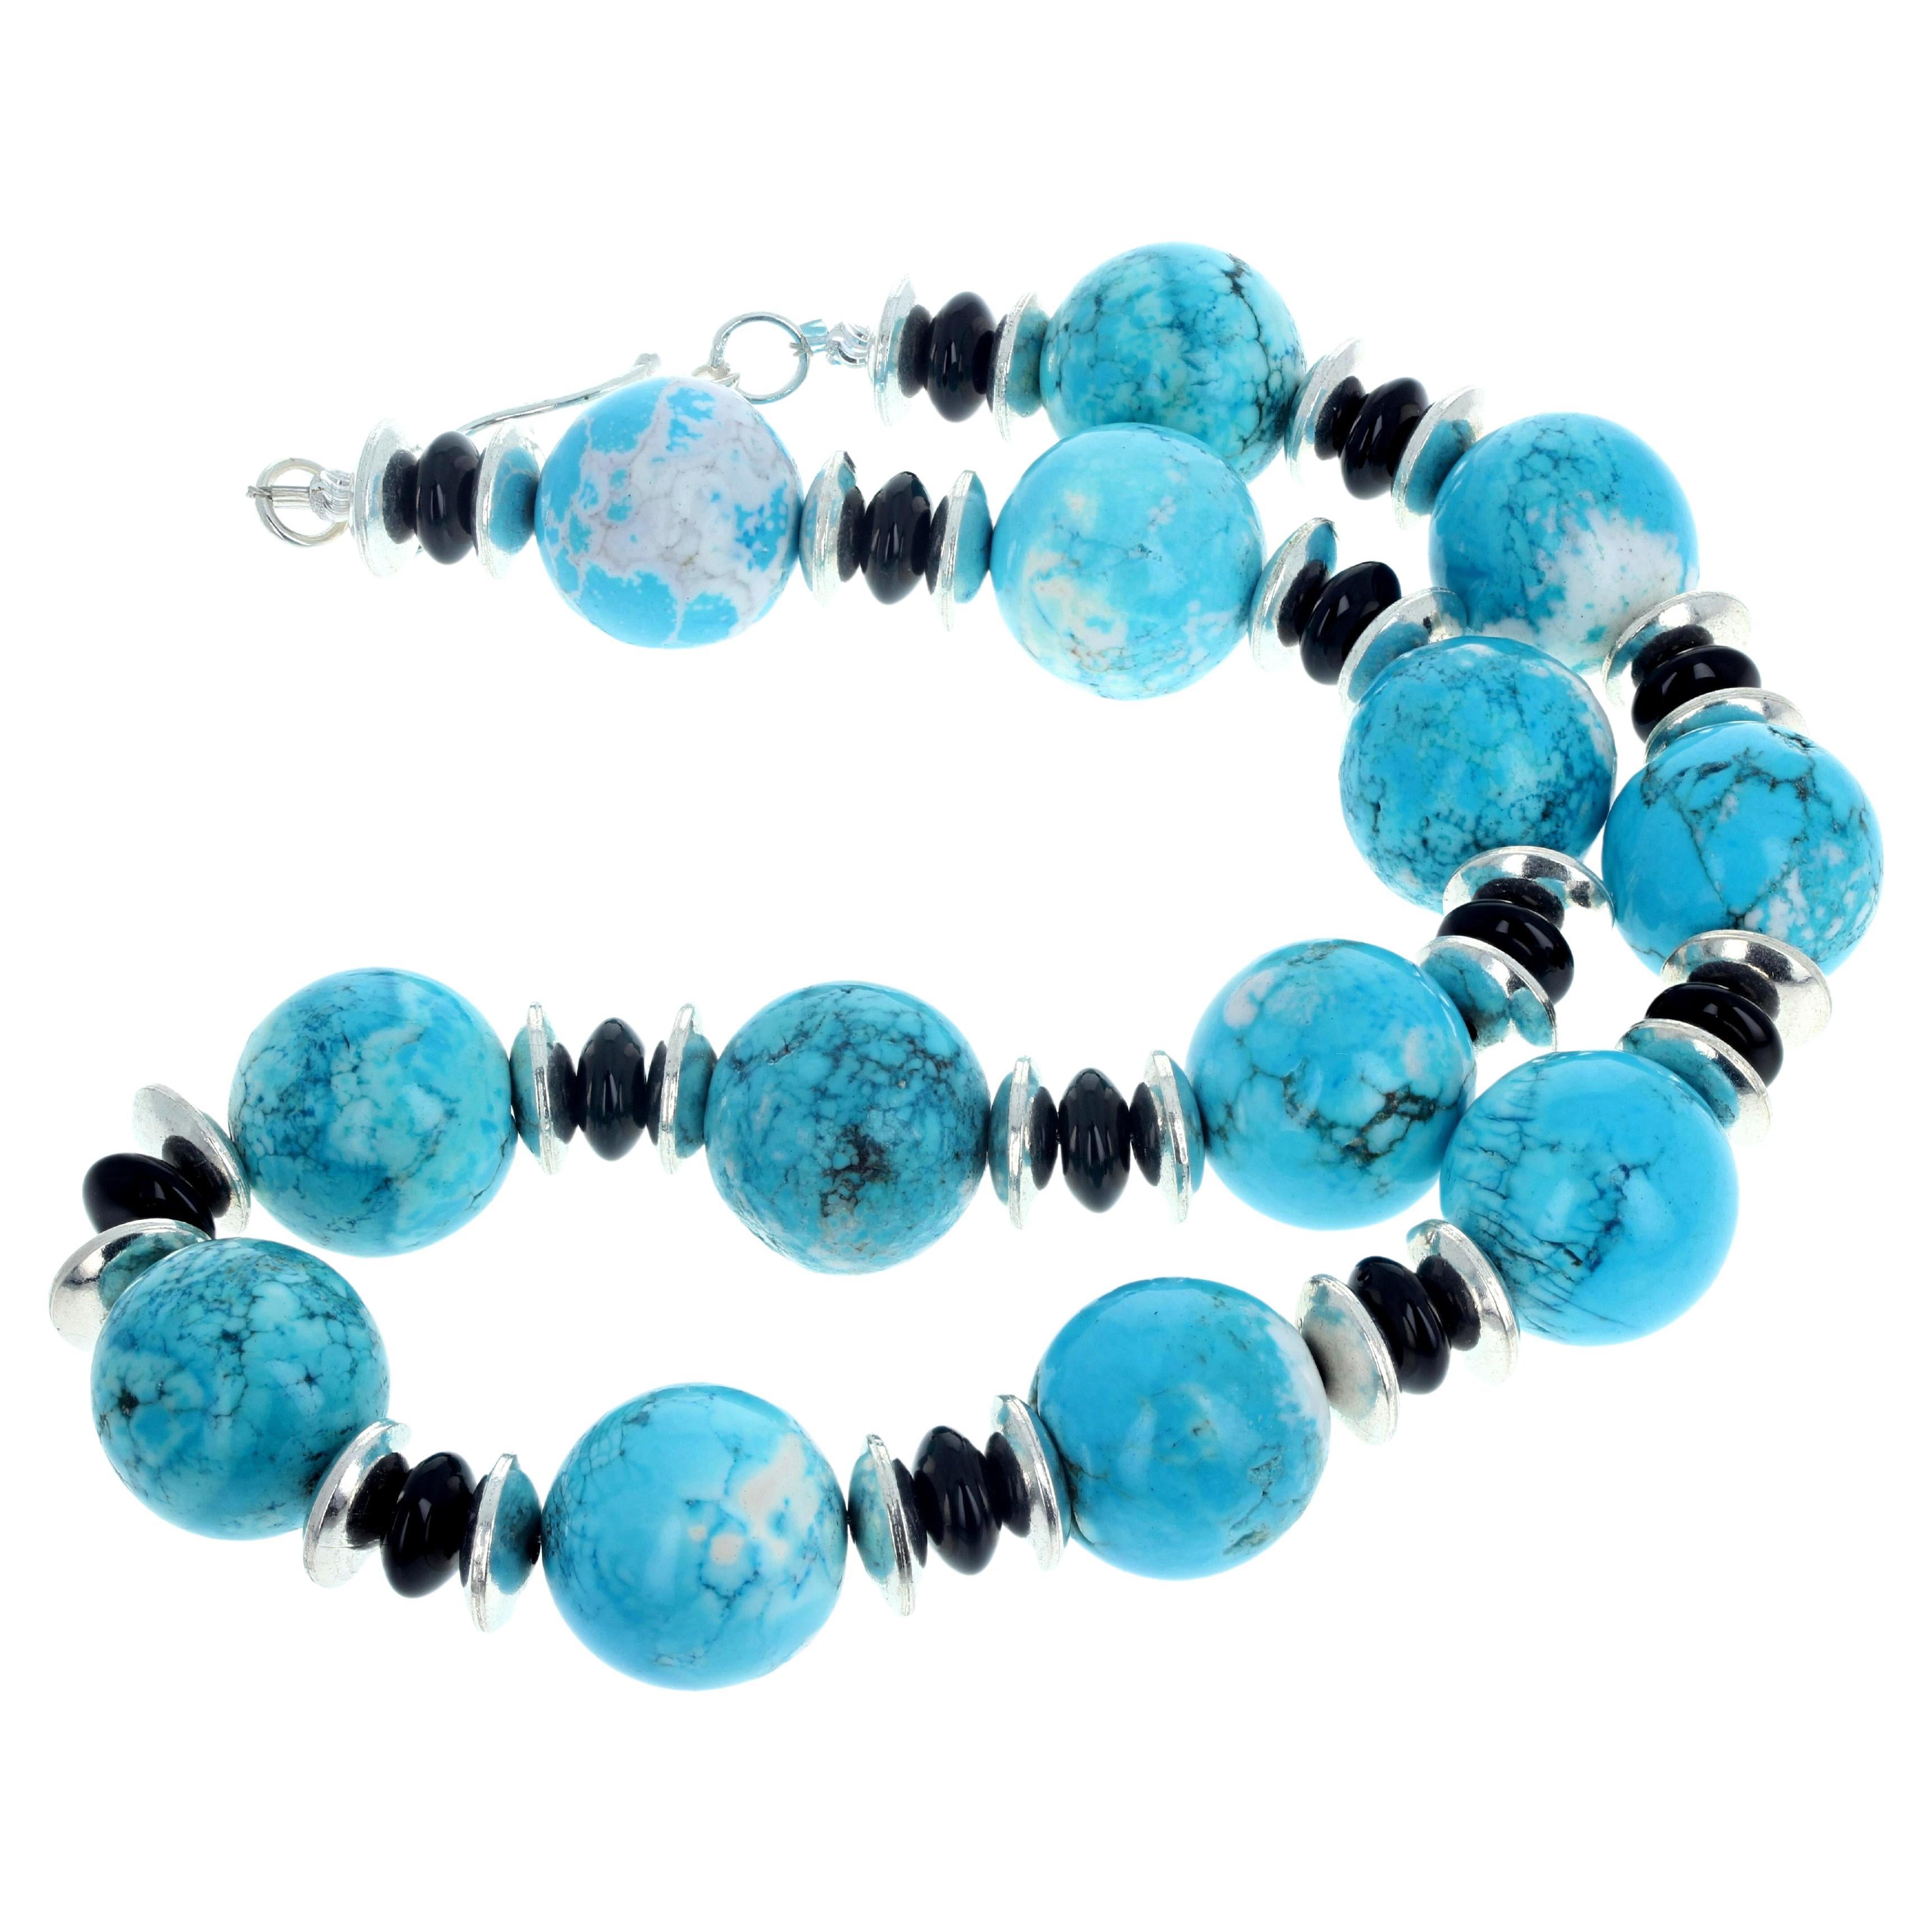 This highly polished big round natural blue Magnesites -calcite - (approximately 20mm) - are enhanced with natural highly polished real sparkling Black Onyx rondels (approximately 10mm) and silver rondels (approximately 12mm).  The clasp on this